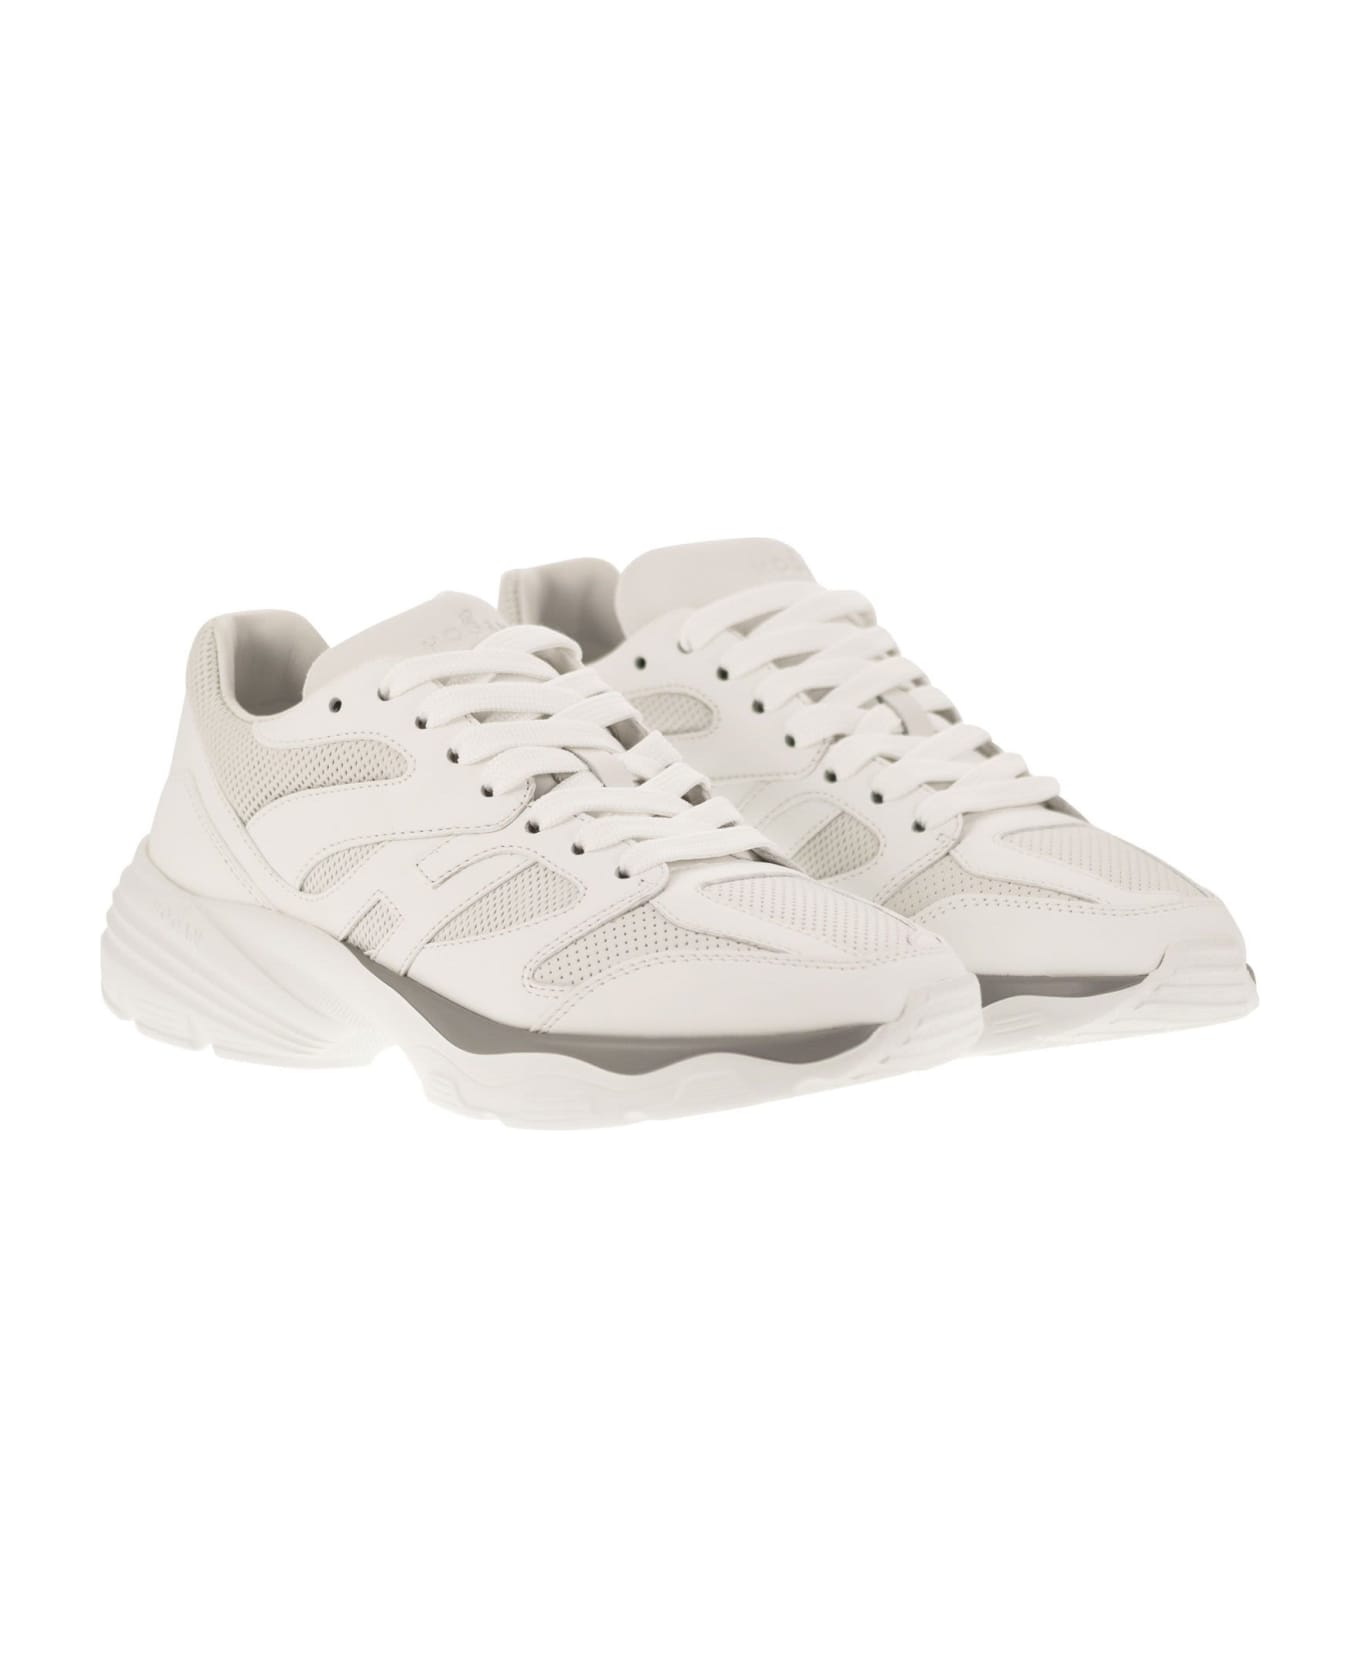 Hogan Round Toe Lace-up Sneakers - White